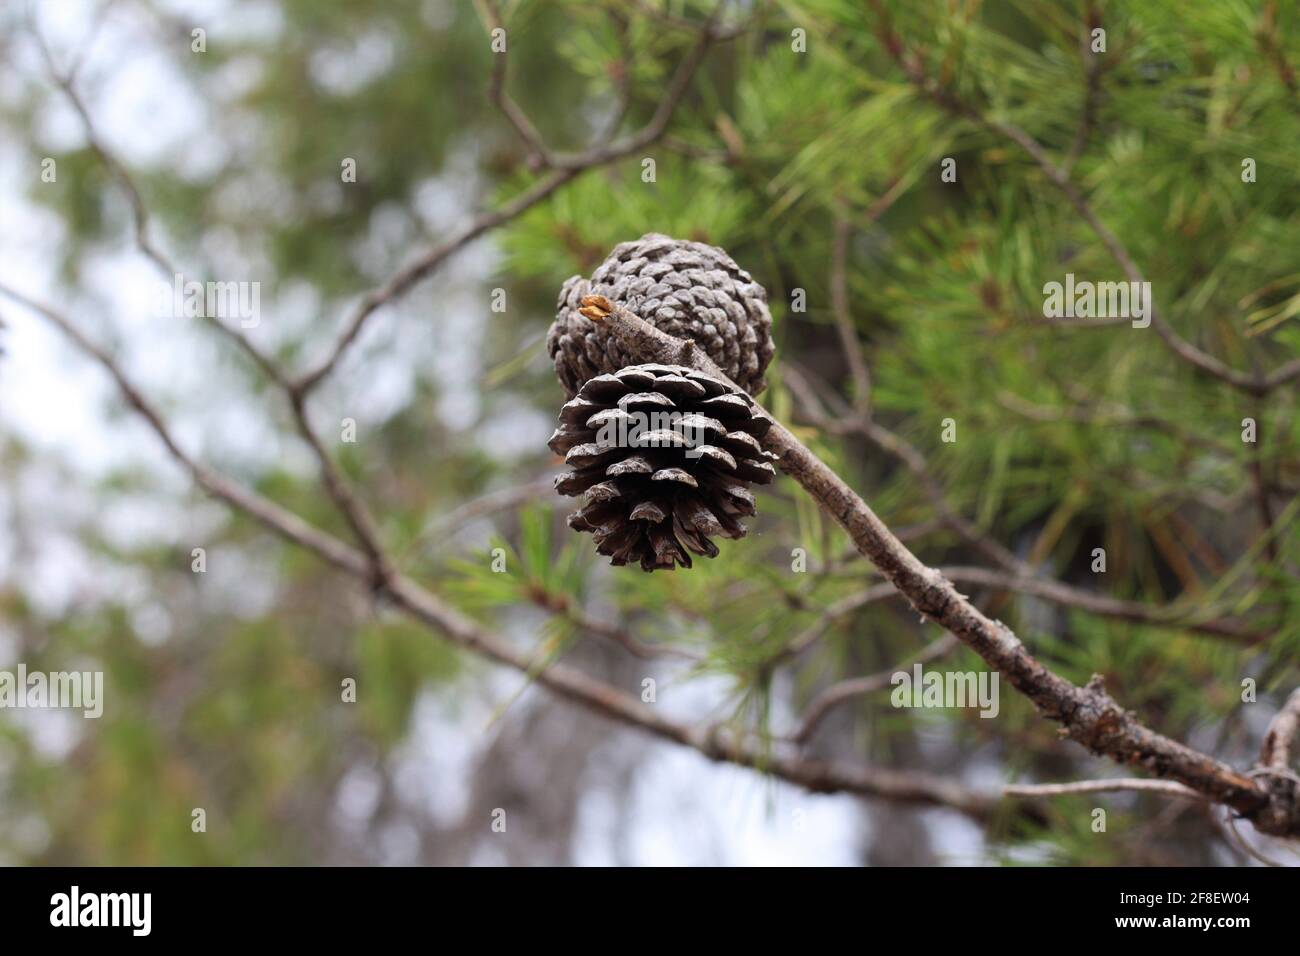 Close-up image of the sand pine tree, species also known as Florida spruce pine and scrub pine. Small shortleaf pinecone on a tree branch. Stock Photo